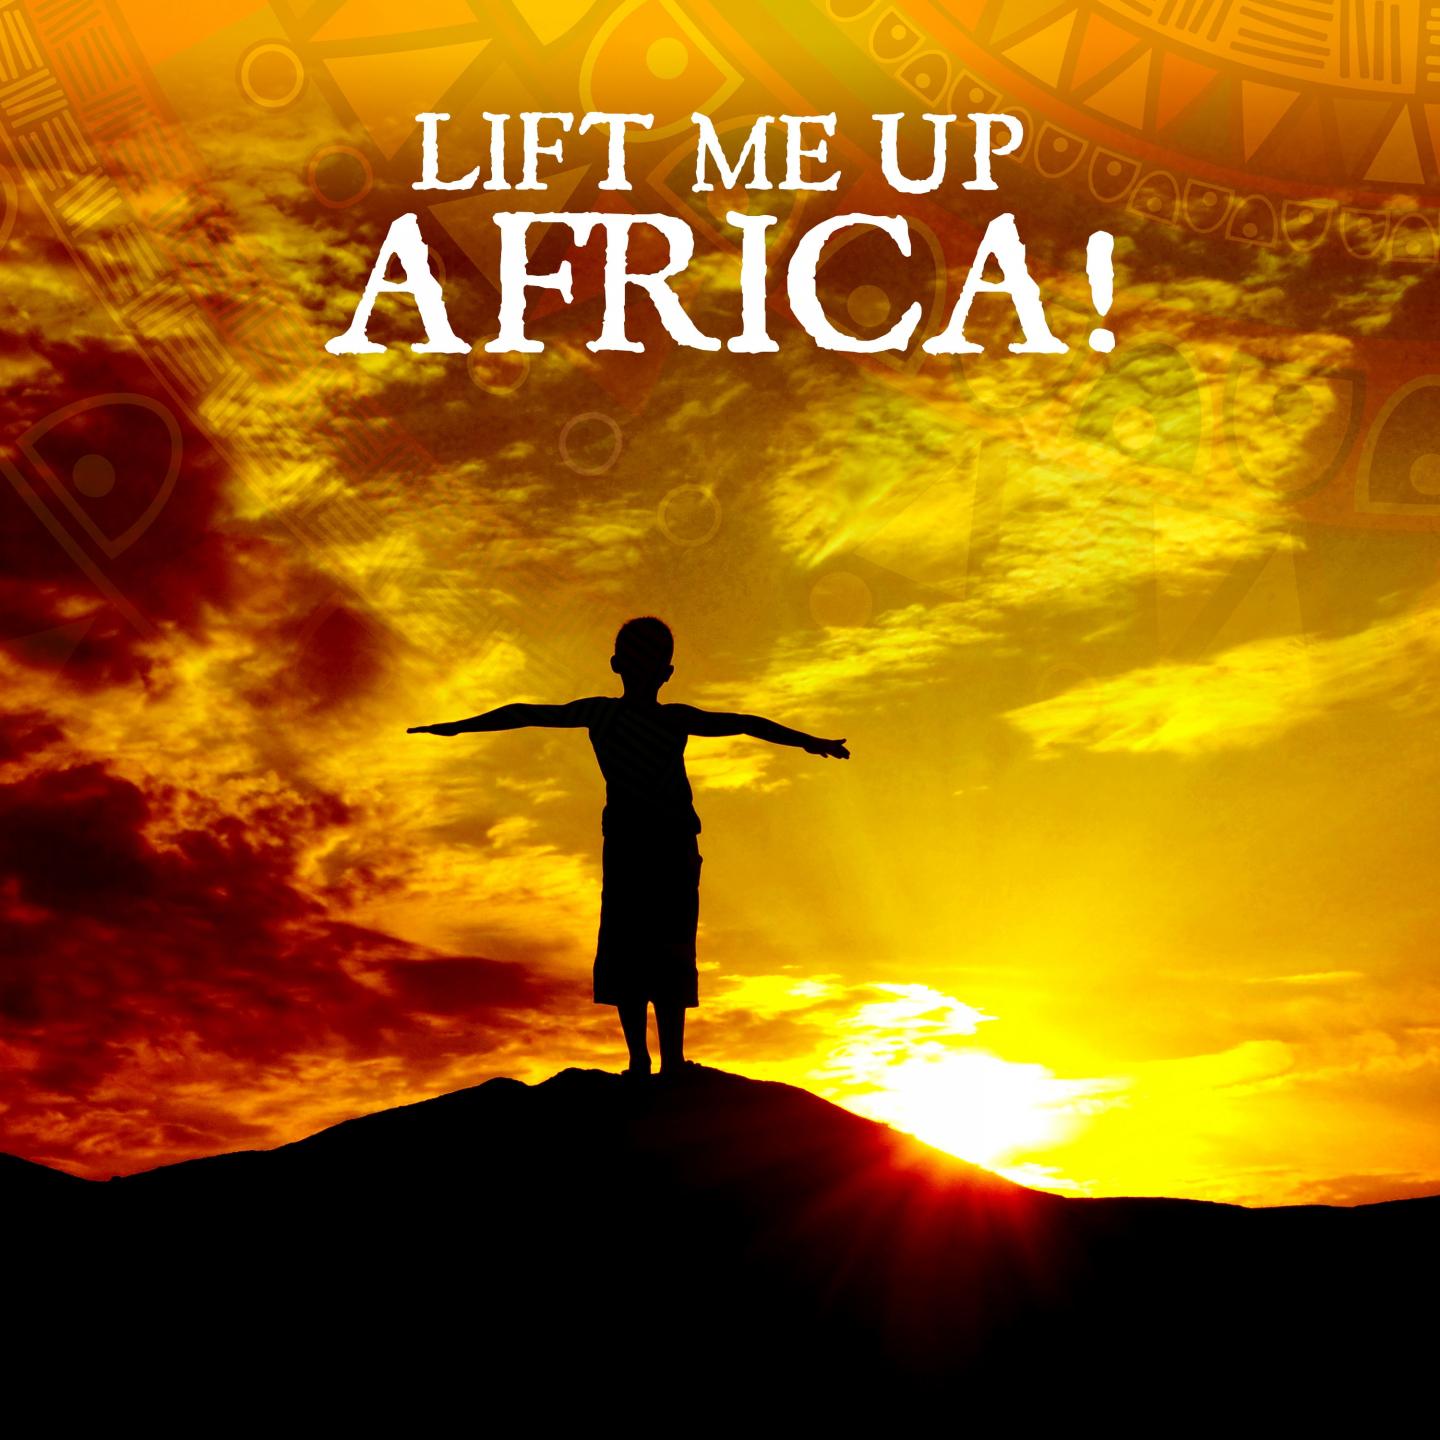 Lift Me Up Africa!